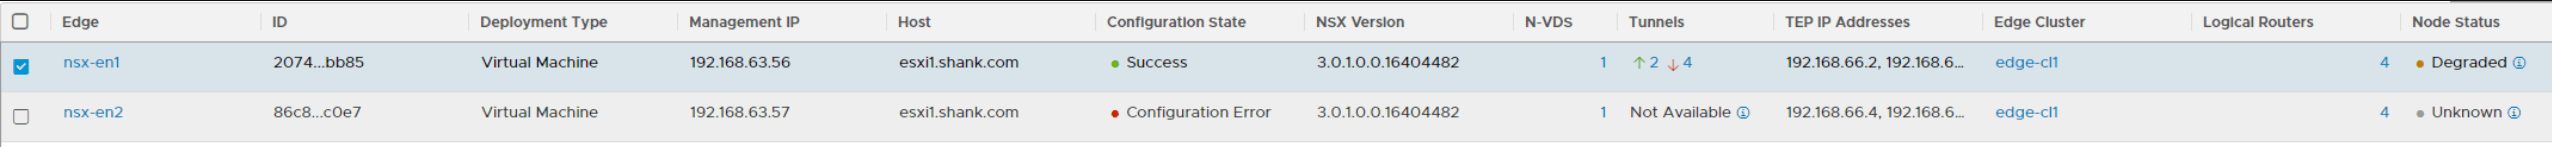 nsx-t one edge fail other one still up